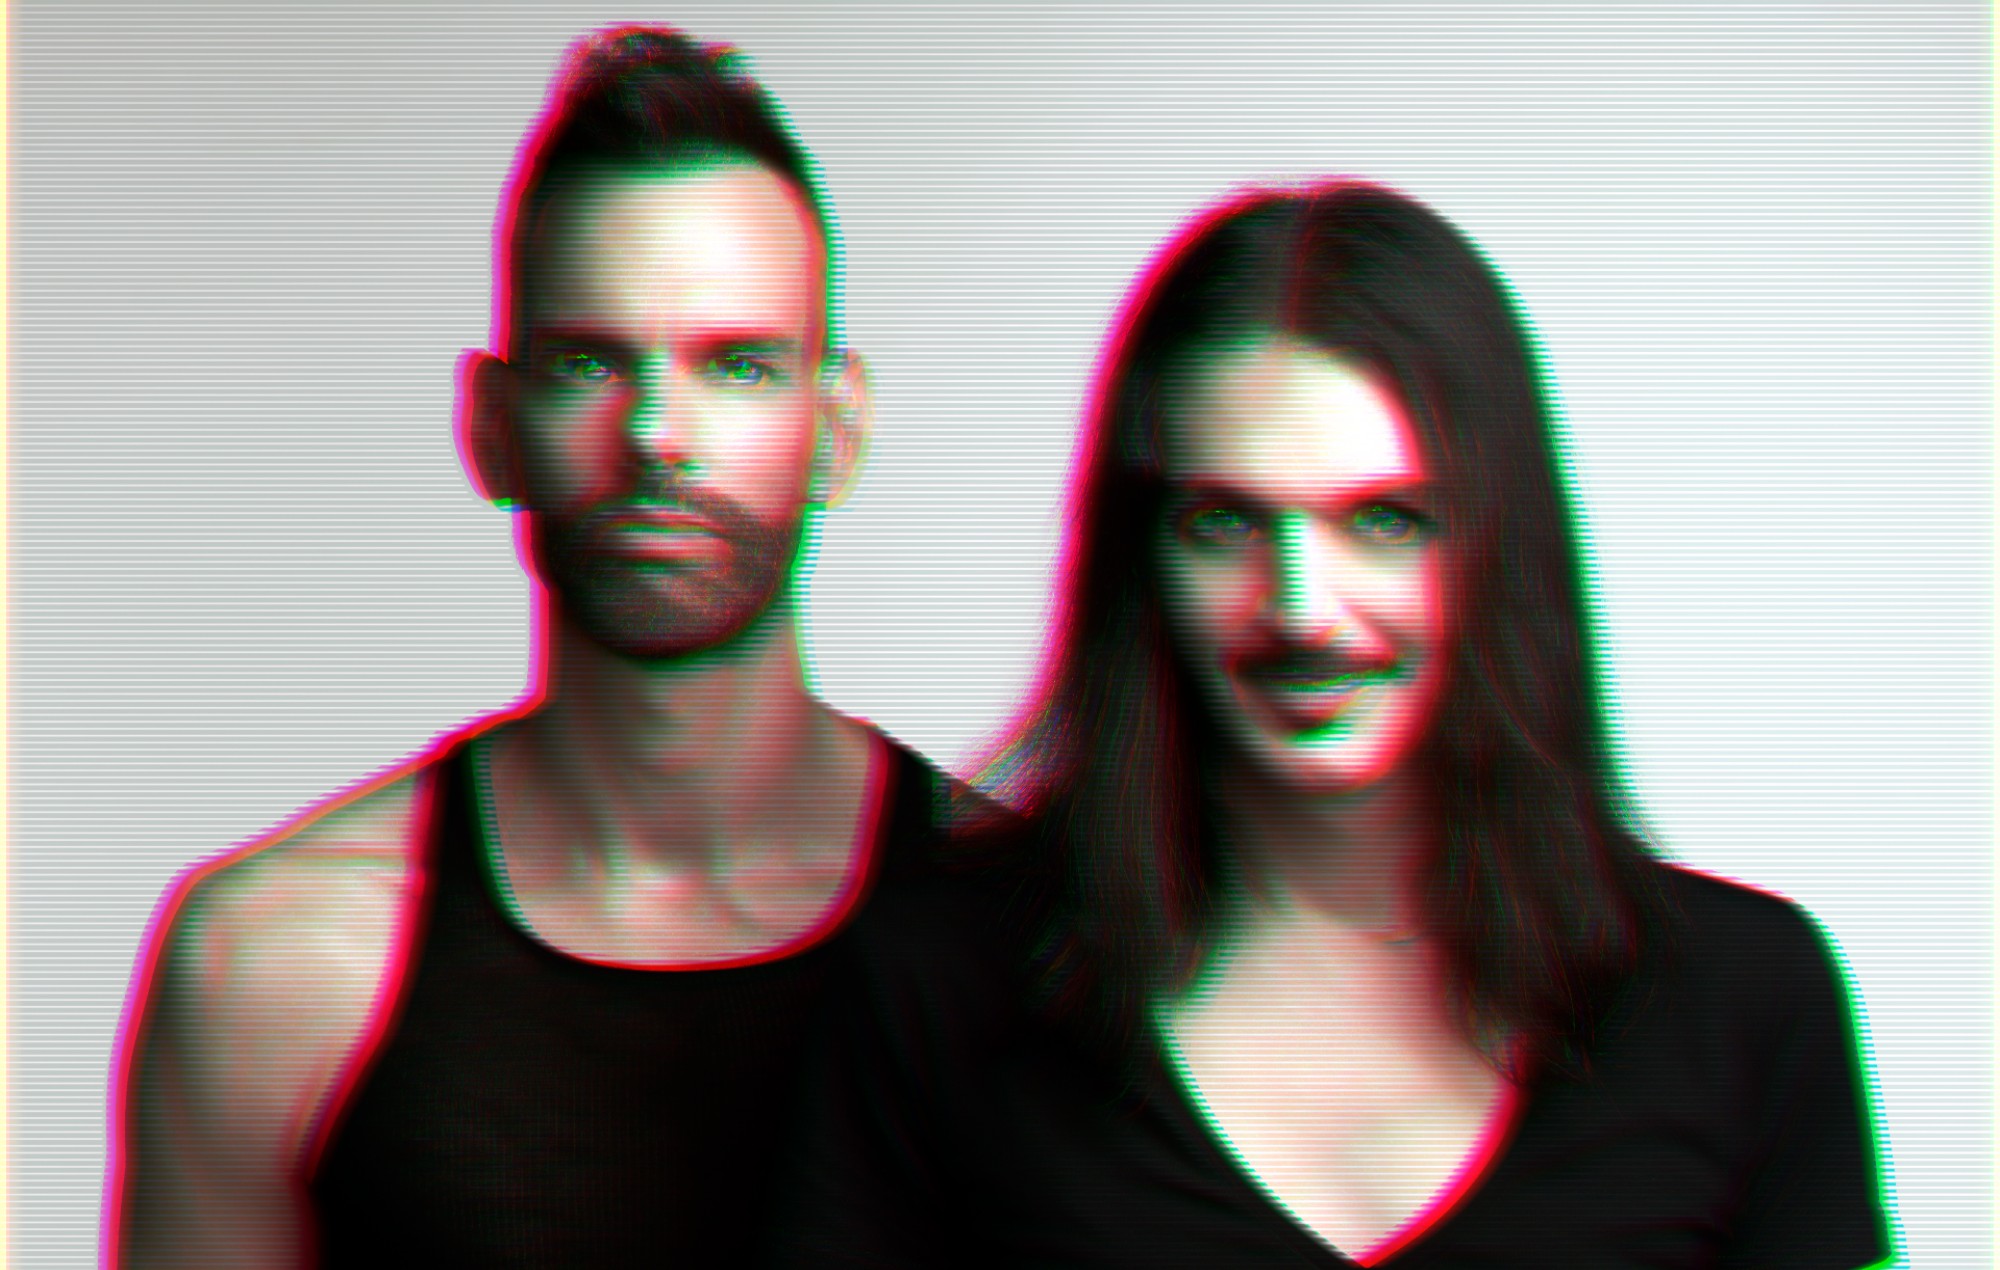 Placebo: “David Bowie taught me how to be a better person”